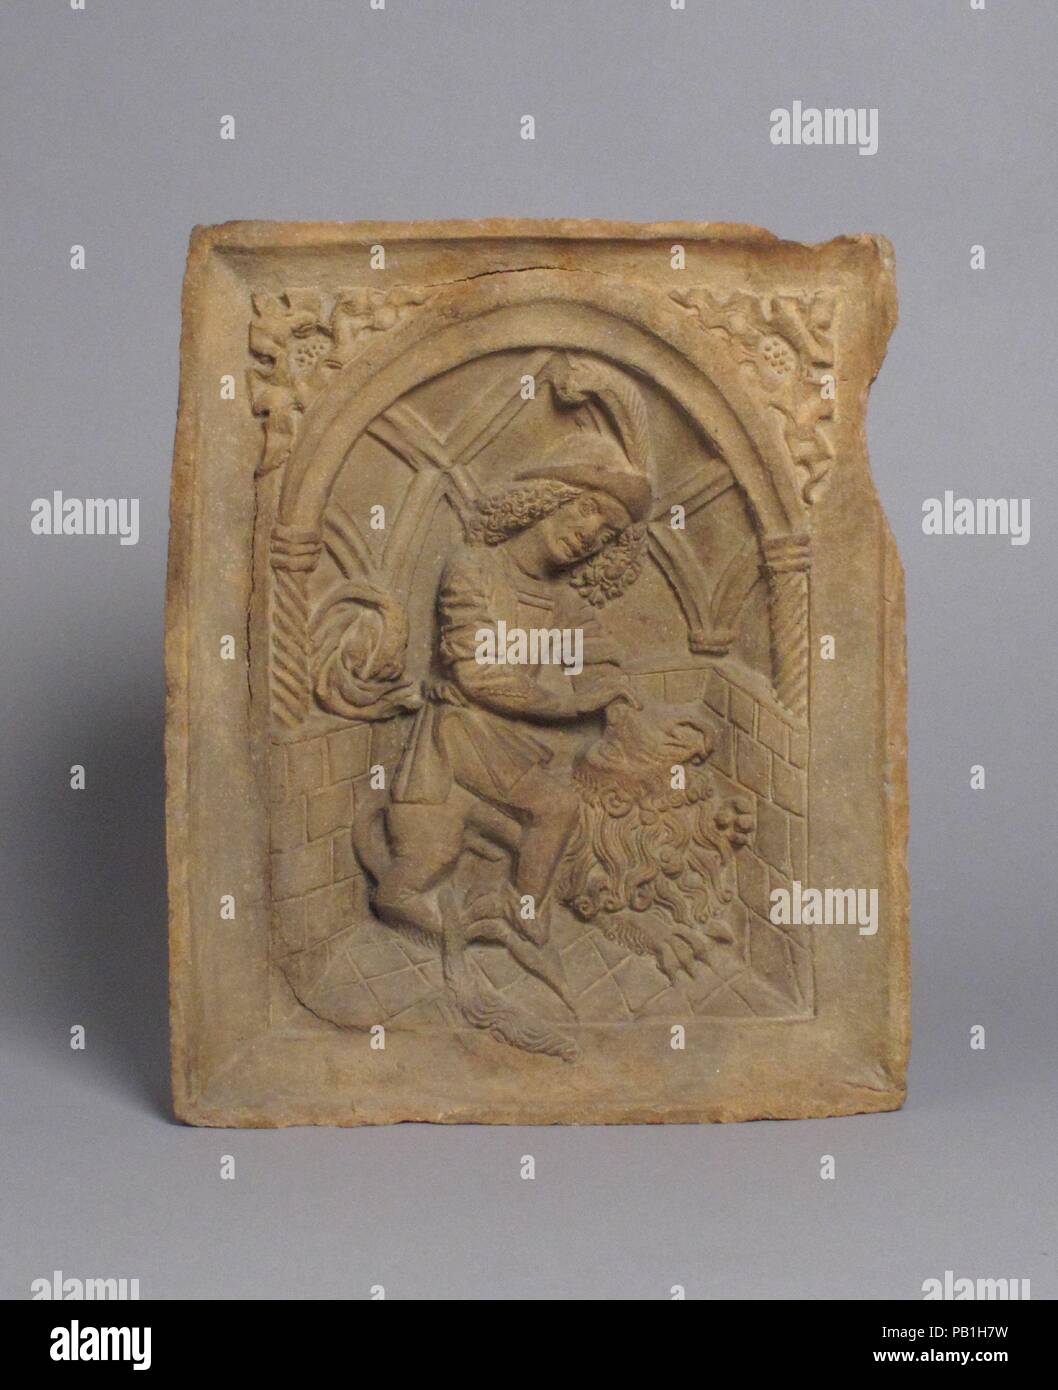 Oven Tile with Samson and the Lion (Based on an Engraving by Master E.S.). Culture: Austrian. Dimensions: Overall: 9 7/8 x 8 1/8 x 2 11/16in. (25.1 x 20.6 x 6.8cm). Date: ca. 1490. Museum: Metropolitan Museum of Art, New York, USA. Stock Photo